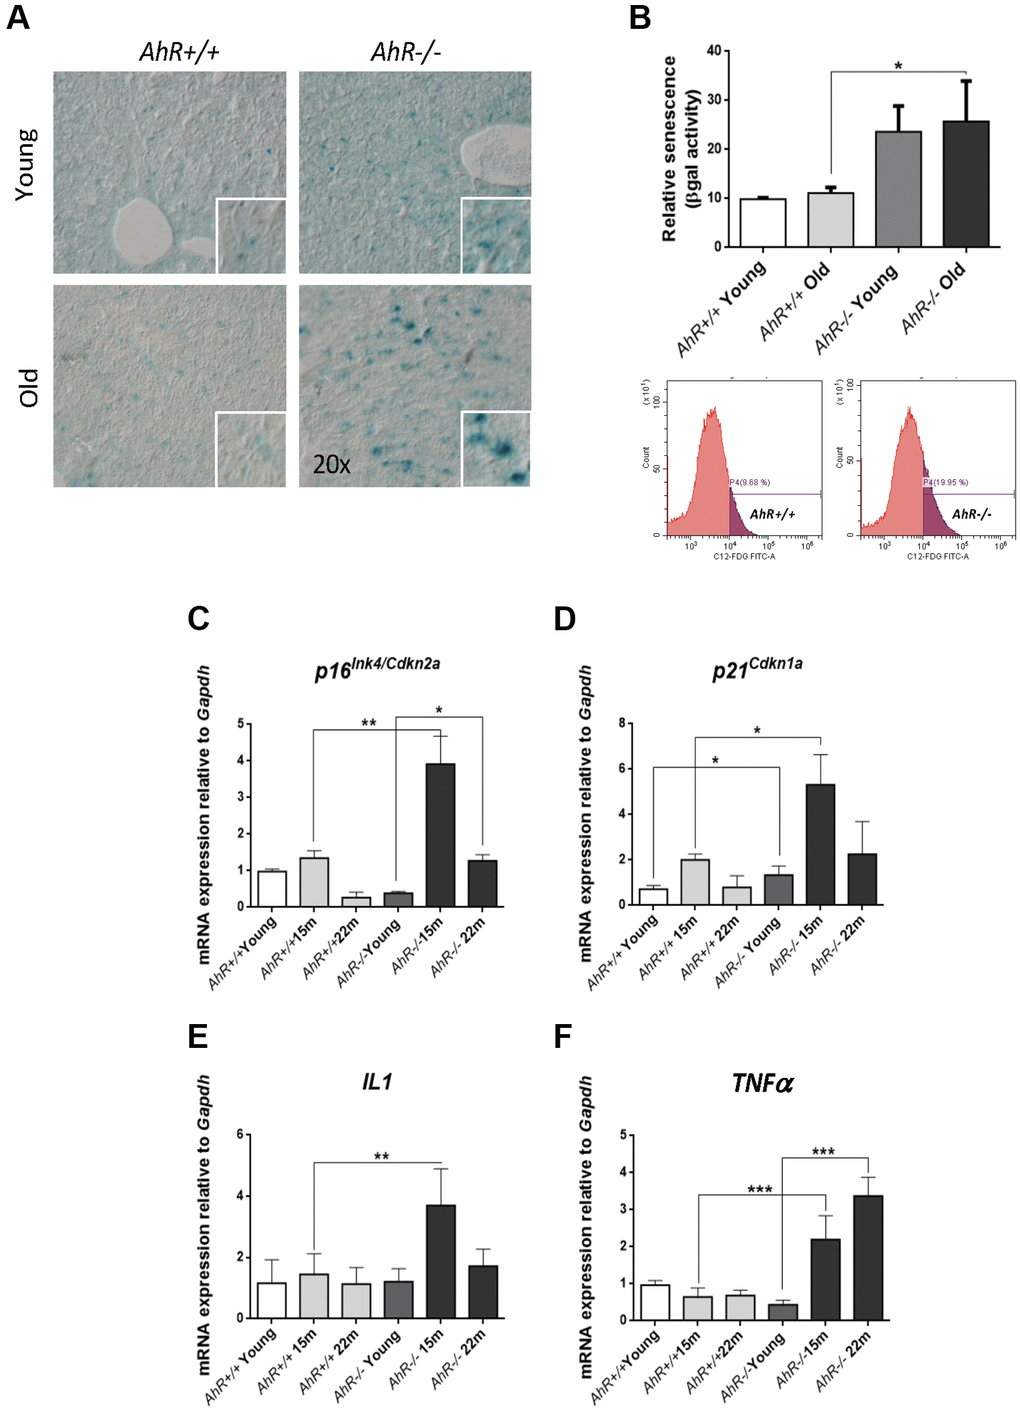 Cell senescence increases with age in AhR-deficient liver. (A) SA-β-Gal activity was analyzed in AhR+/+ and AhR−/− liver sections by staining with the chromogenic substrate X-Gal. (B) SA-β-Gal activity was analyzed by FACS in isolated liver cells (gentleMACS) using the fluorescent substrate C12FDG. (C–F) mRNA levels of senescence driver genes p16Ink4a (C) and p21Cip1 (D) and SASP-related genes IL1 (E) and TNFα (F) were analyzed by RT-qPCR in AhR+/+ and AhR−/− livers at the indicated ages. Oligonucleotides used are indicated in Supplementary Table 1. Gapdh was used to normalize target gene expression (△Ct) and 2−△△Ct to calculate changes in mRNA levels with respect to wild type or untreated conditions. Data are shown as mean + SD (*P **P ***P 